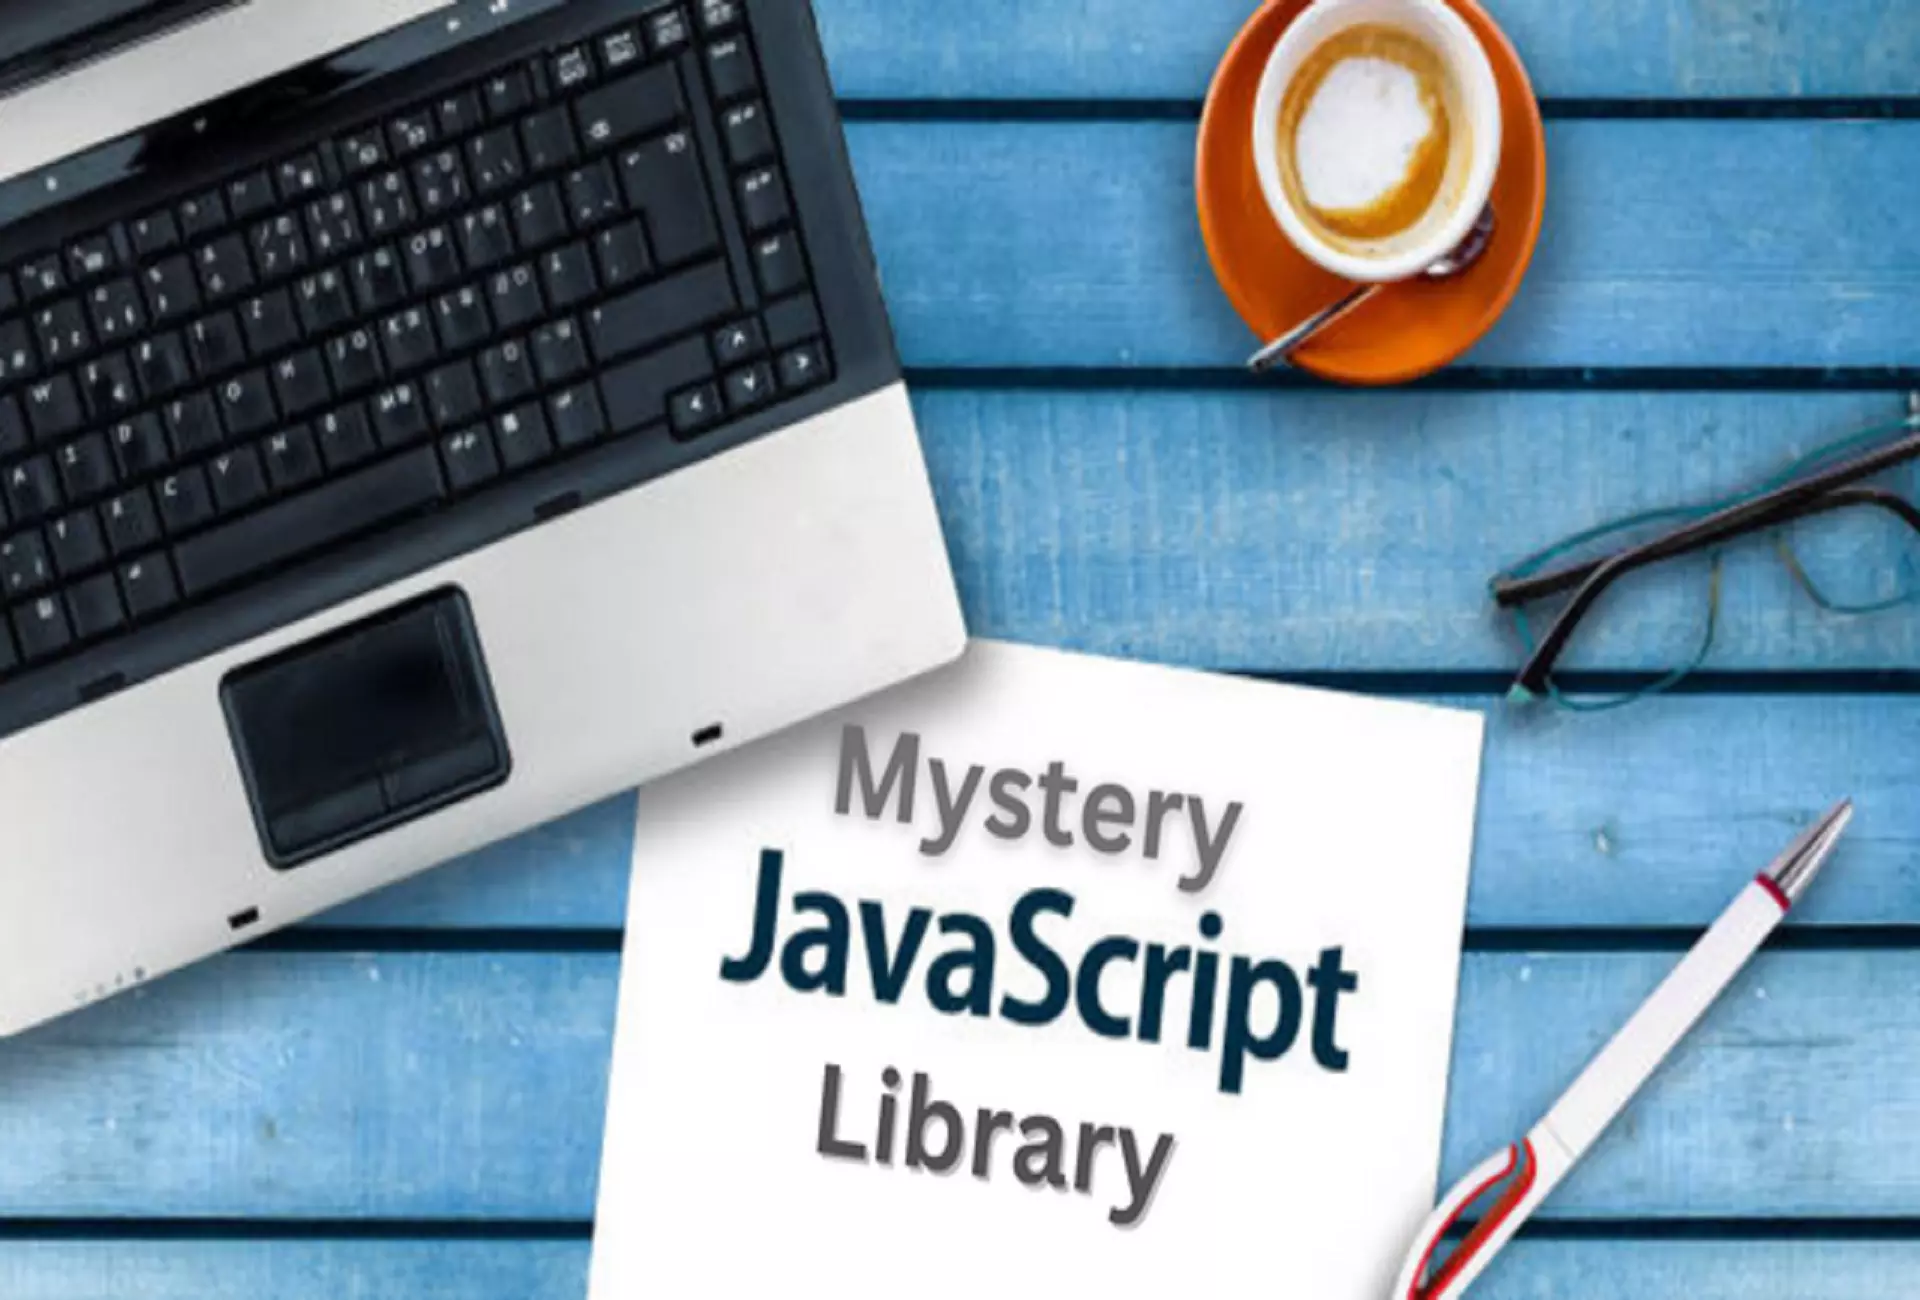 JS Meevo: JavaScript Library Is The Web’s Latest Mystery